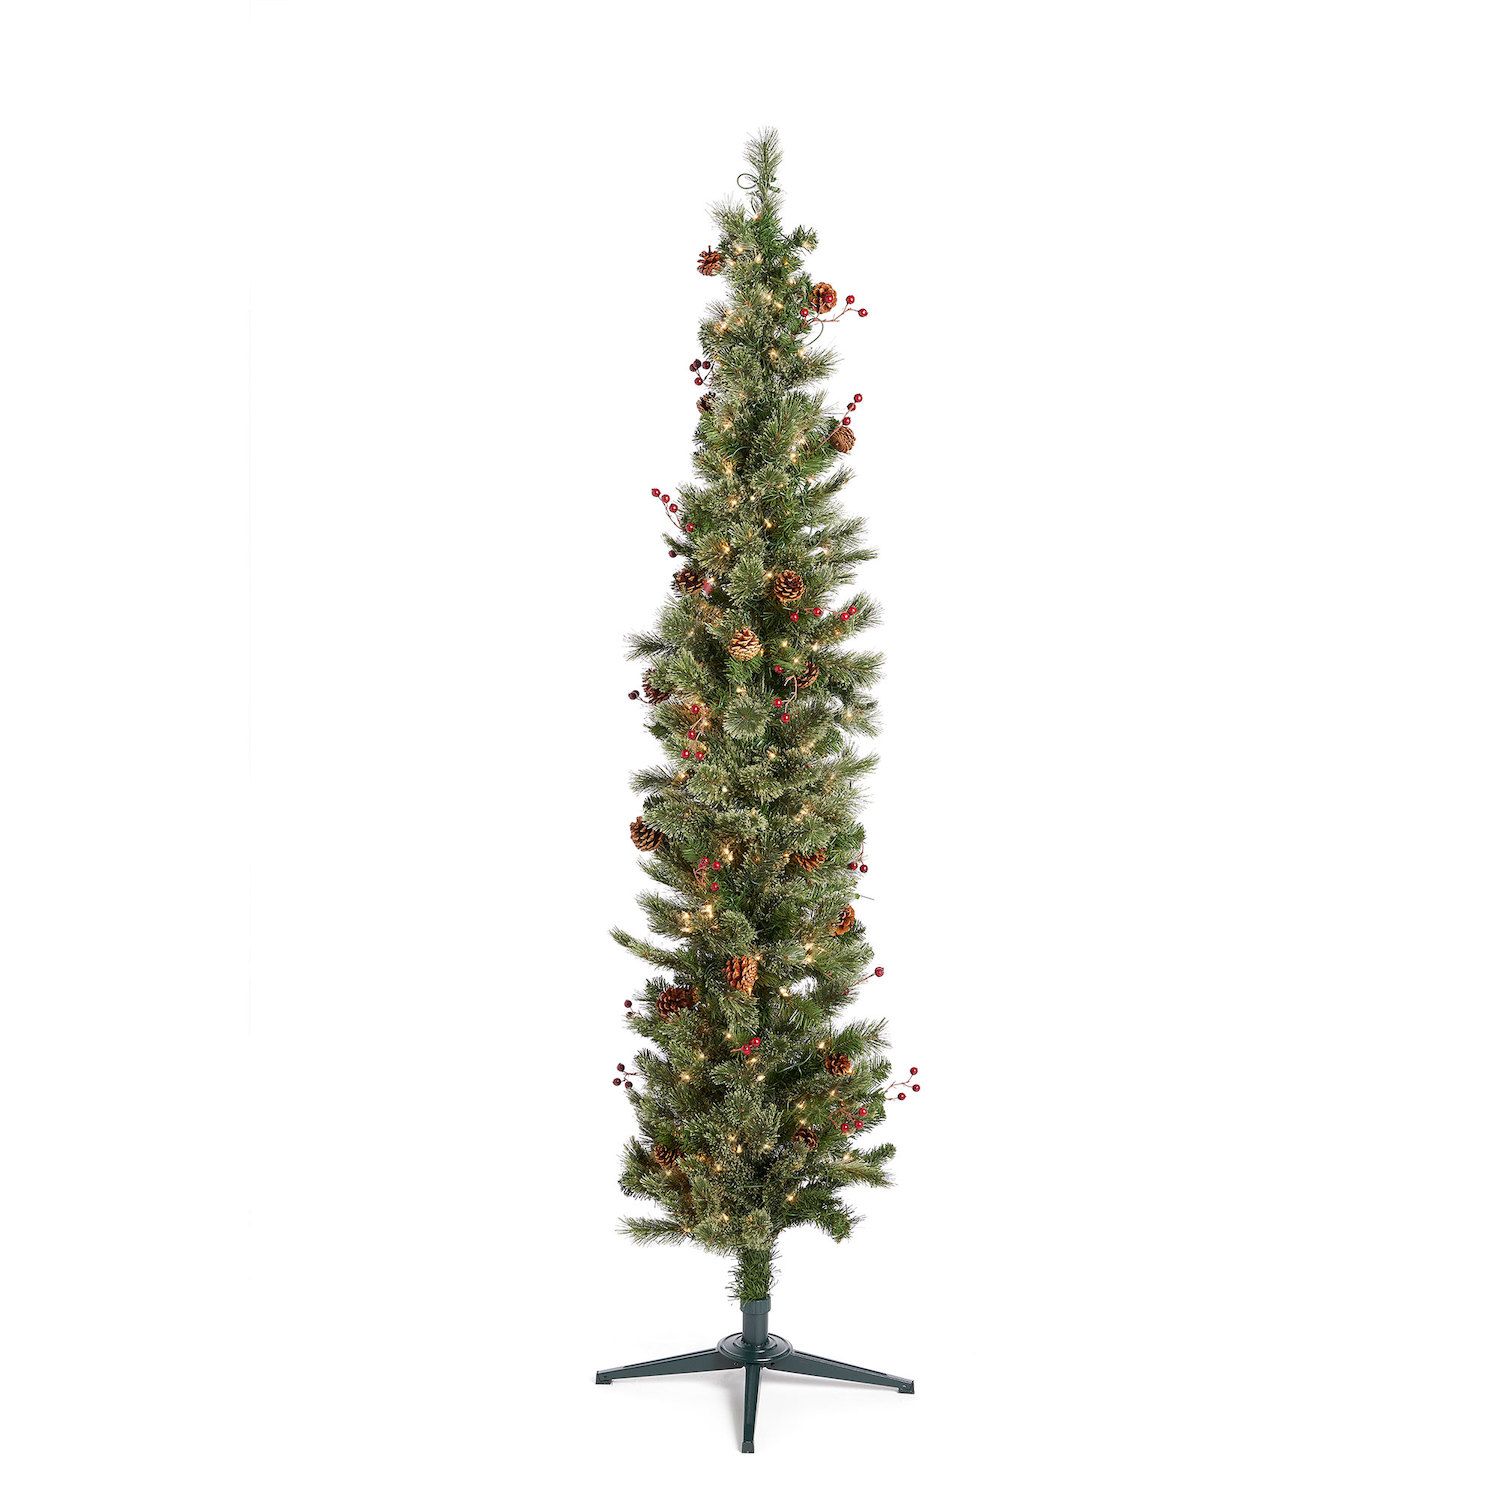 Image for Home Heritage Stanley 7 Ft Skinny Pencil Pine Pre-Lit & Decorated Christmas Tree at Kohl's.